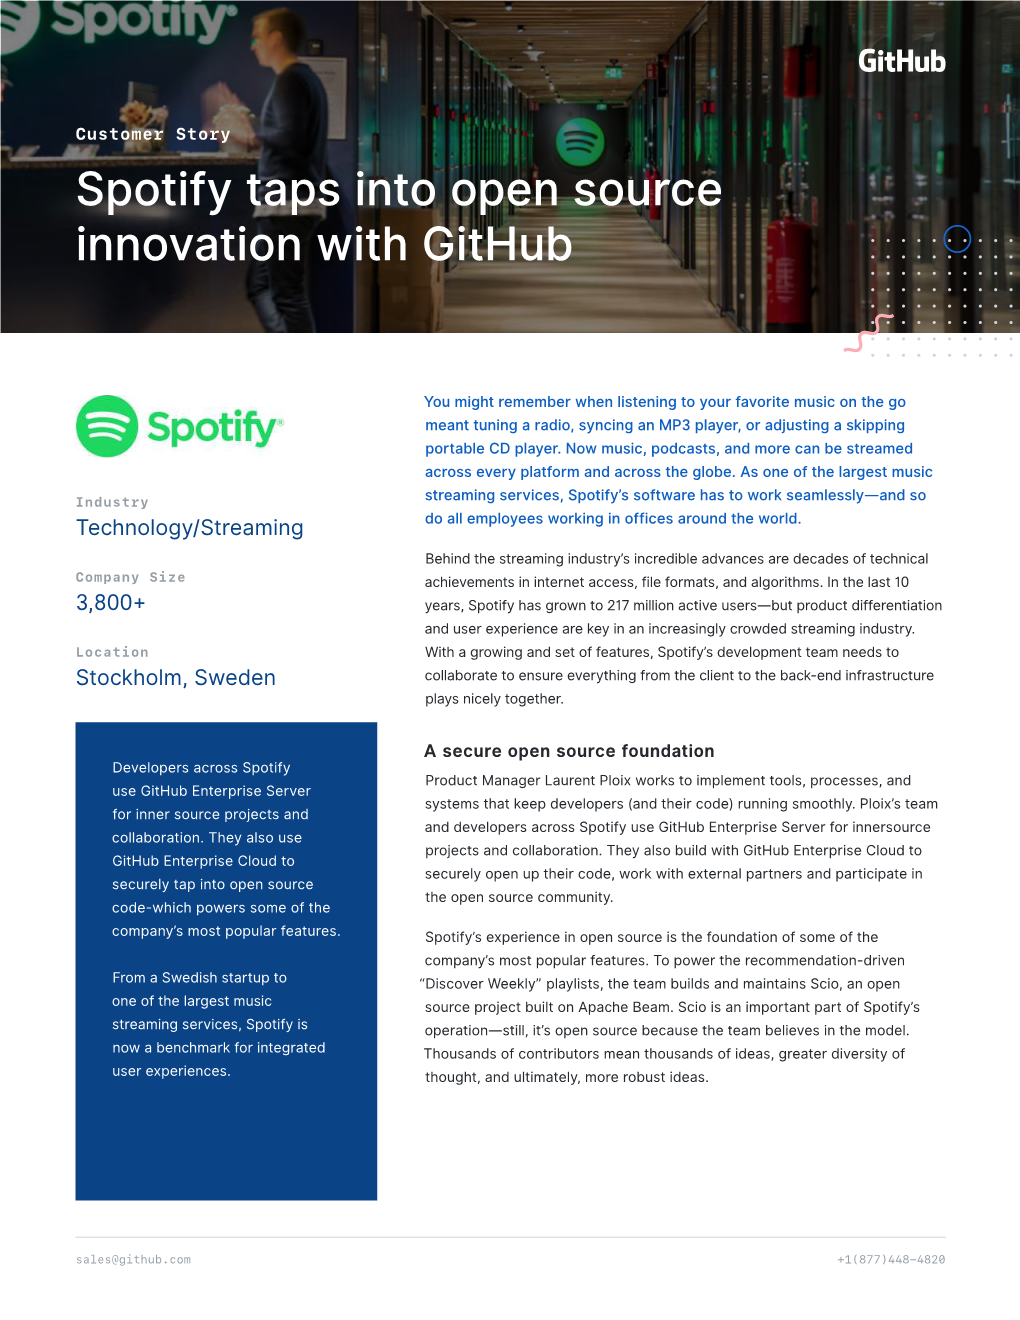 Spotify Taps Into Open Source Innovation with Github